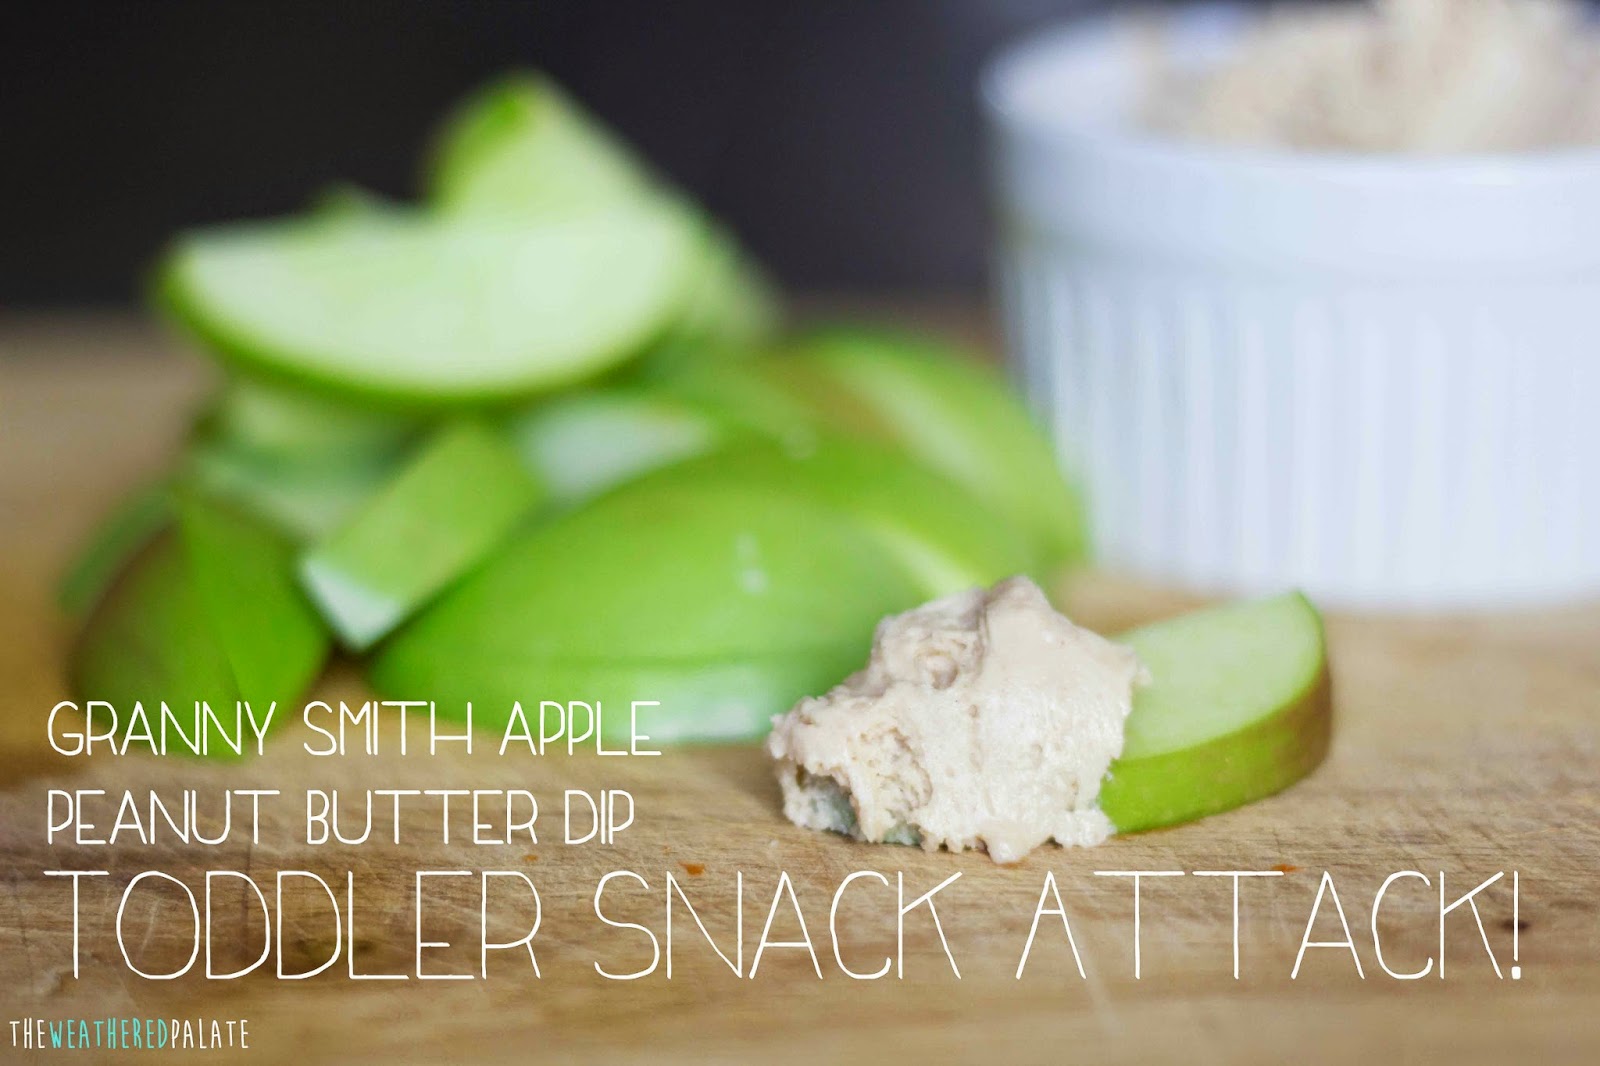 http://www.theweatheredpalate.com/2014/09/toddler-snack-attack_26.html